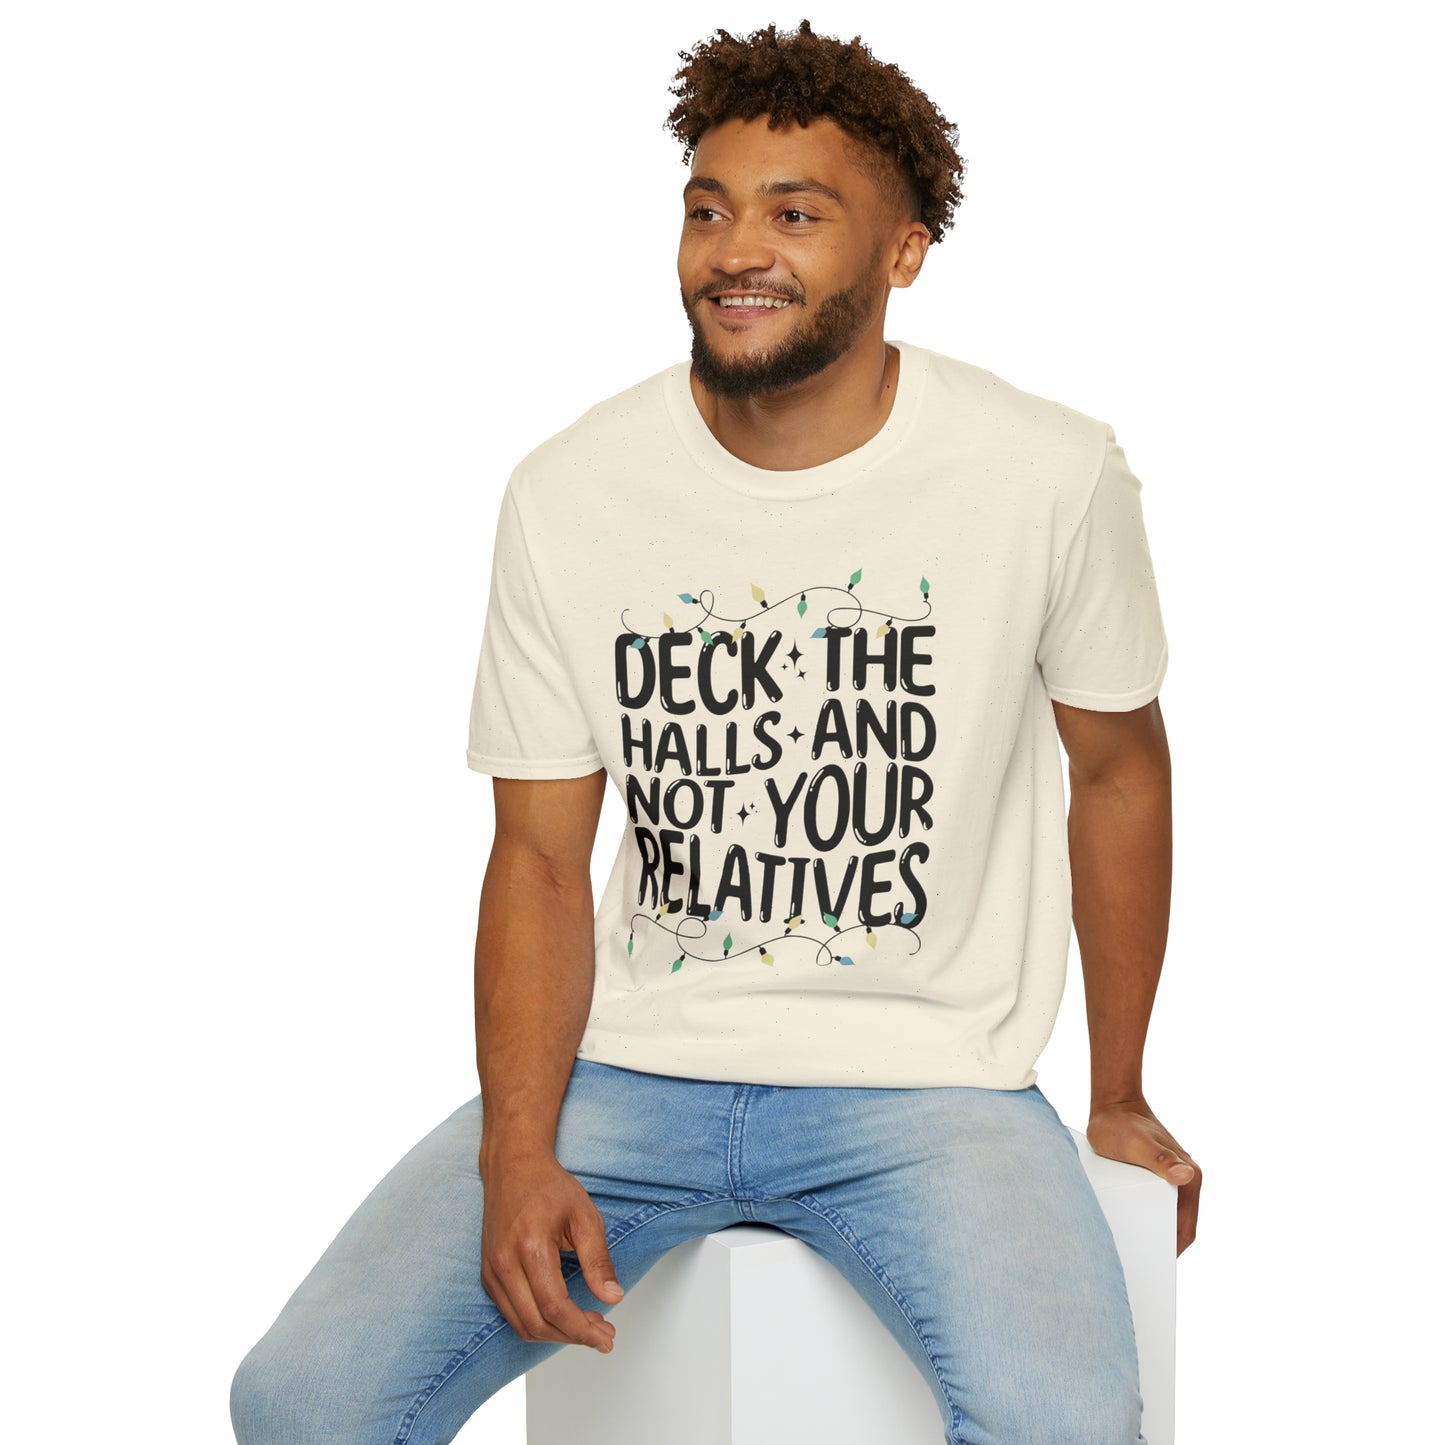 Deck The Halls-Not Your Relatives T-Shirt